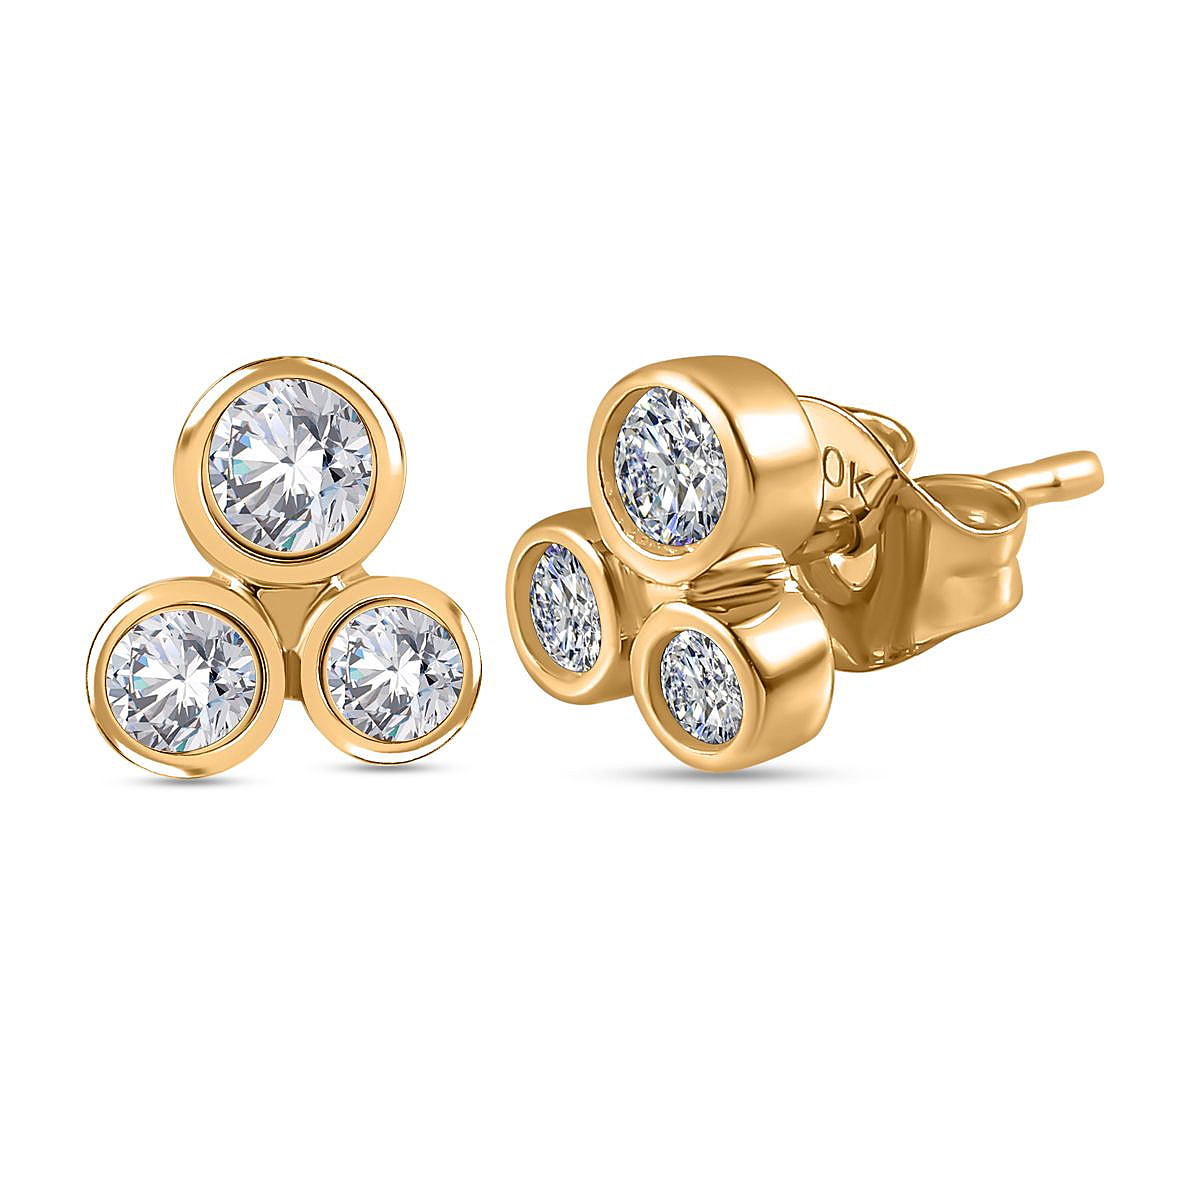 Designer Inspired One Time Deal- 10K Yellow Gold Diamond Bubble Earrings 0.50 Ct